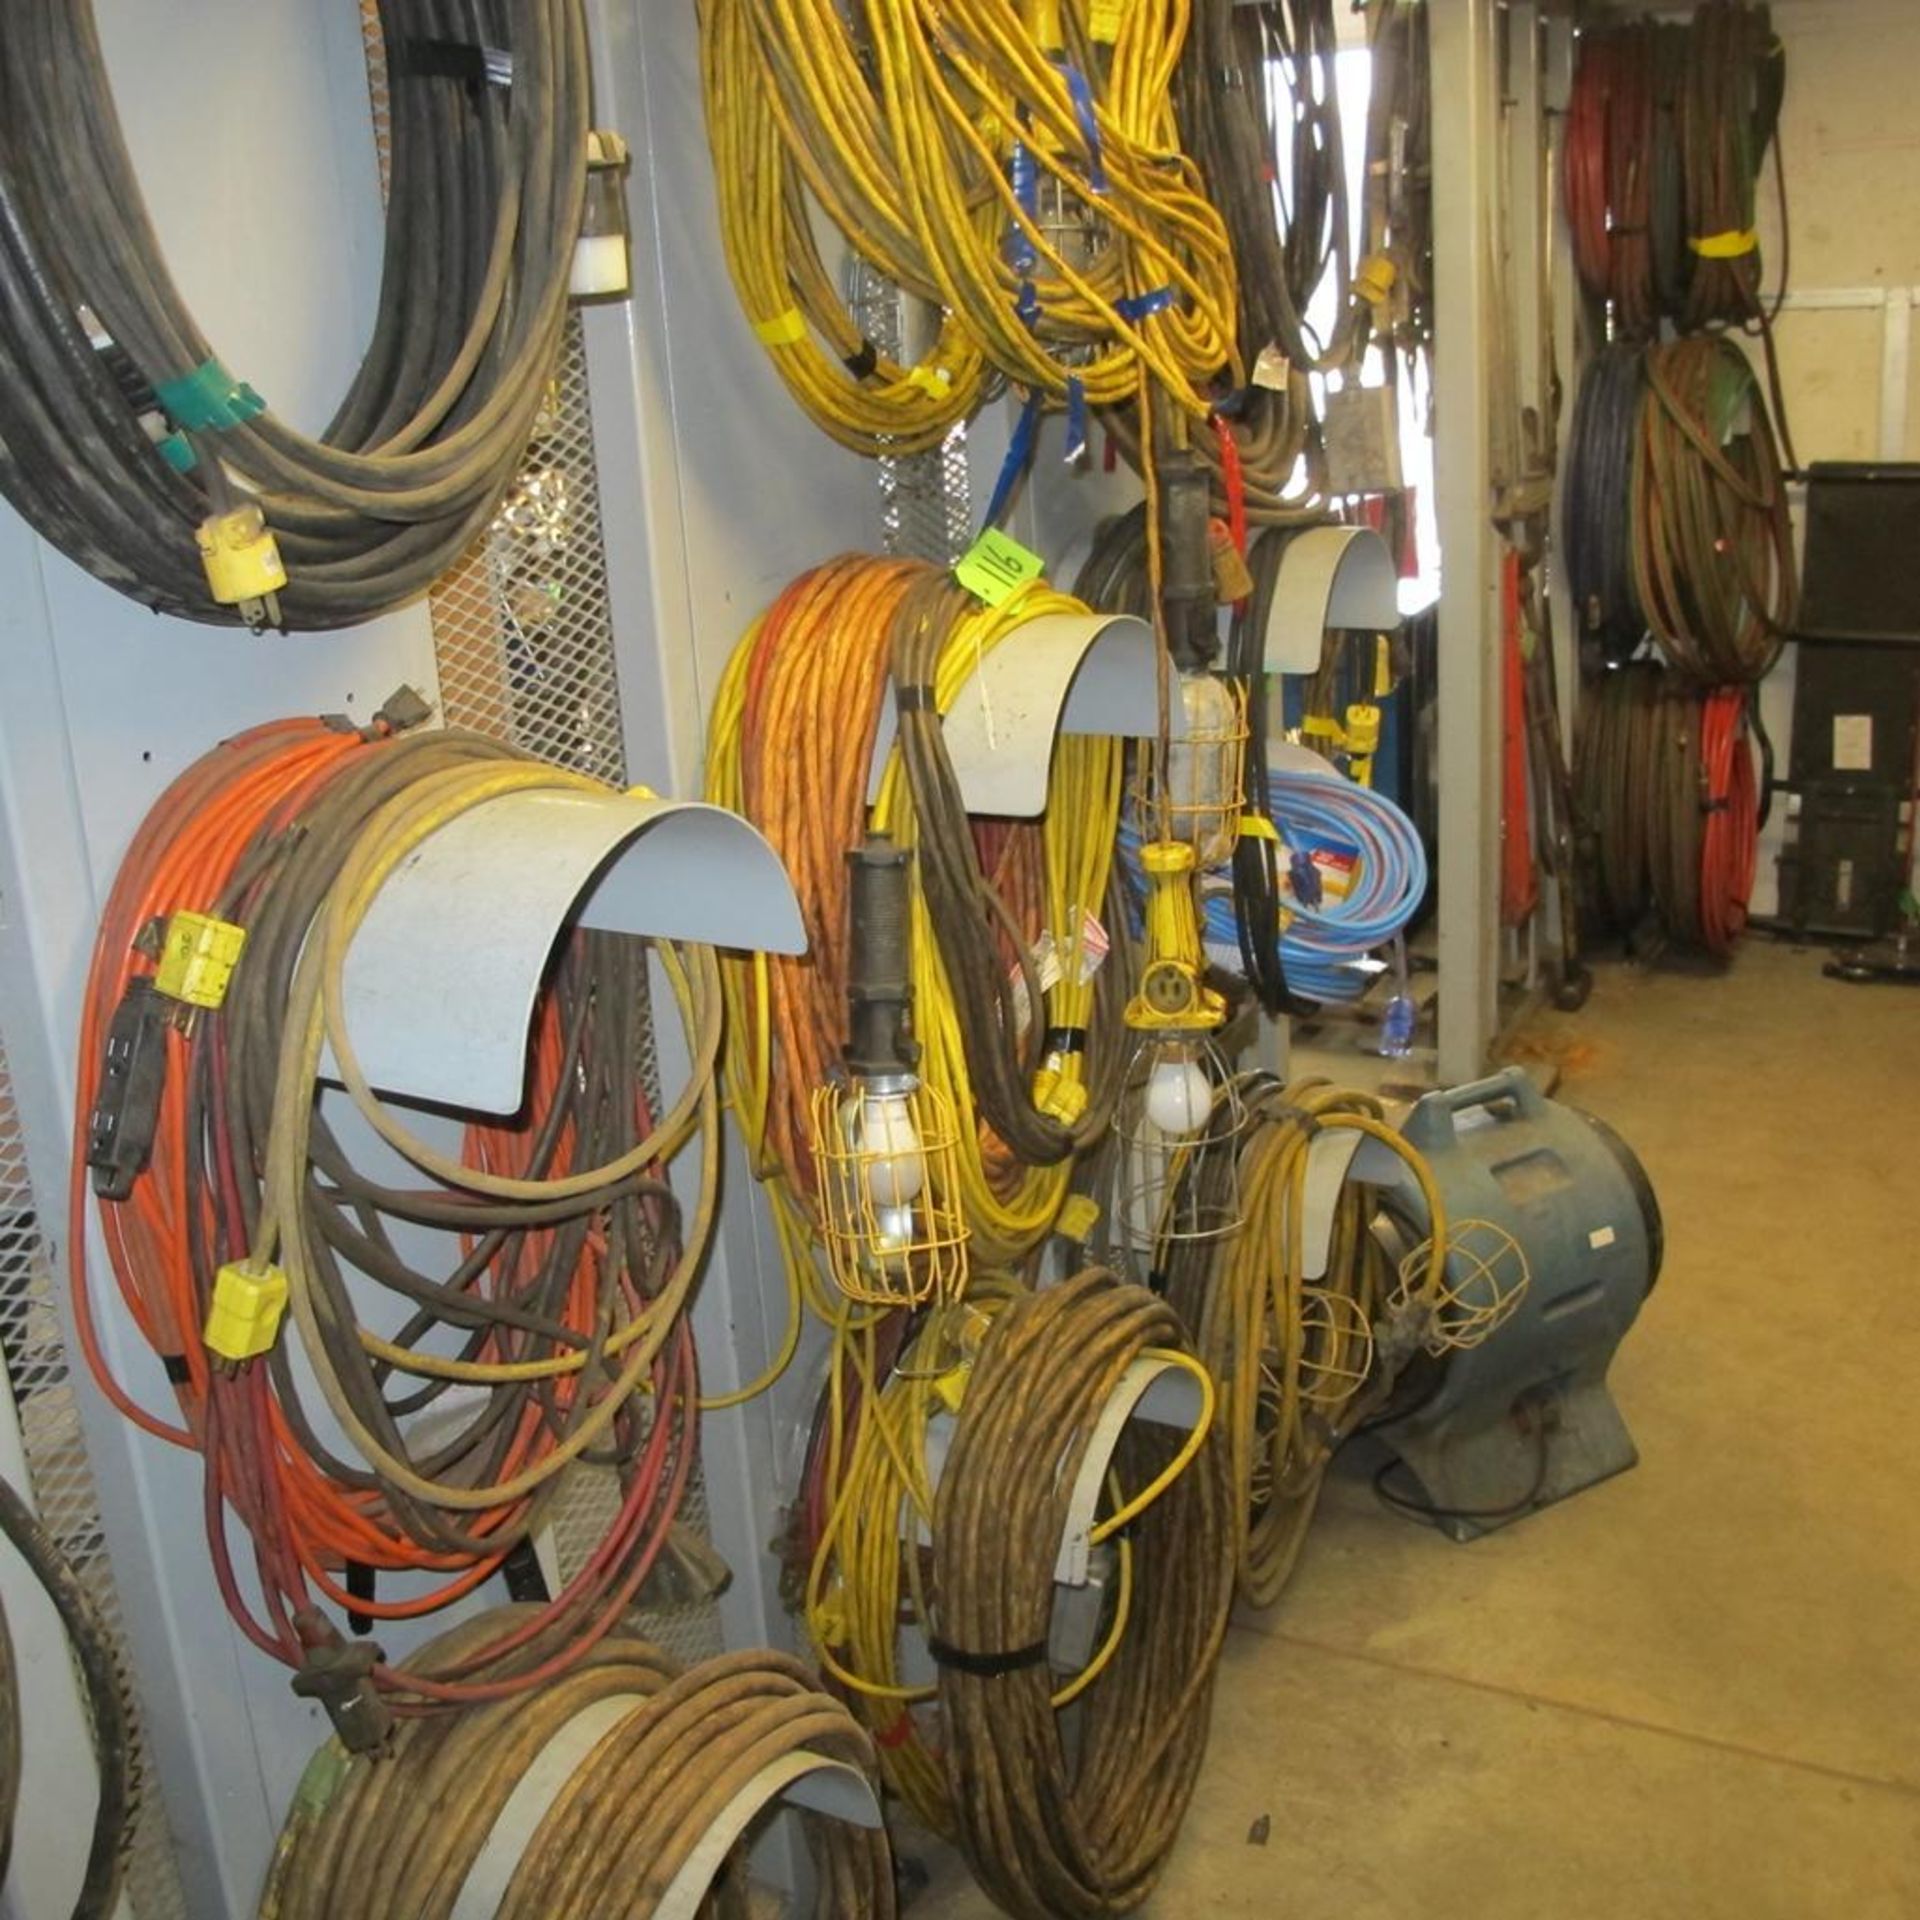 LARGE LOT OF POWER CABLES, EXTENSION CORDS, LAMPS ON 9 HOLDERS IN CAGE (IN WEST BLDG)